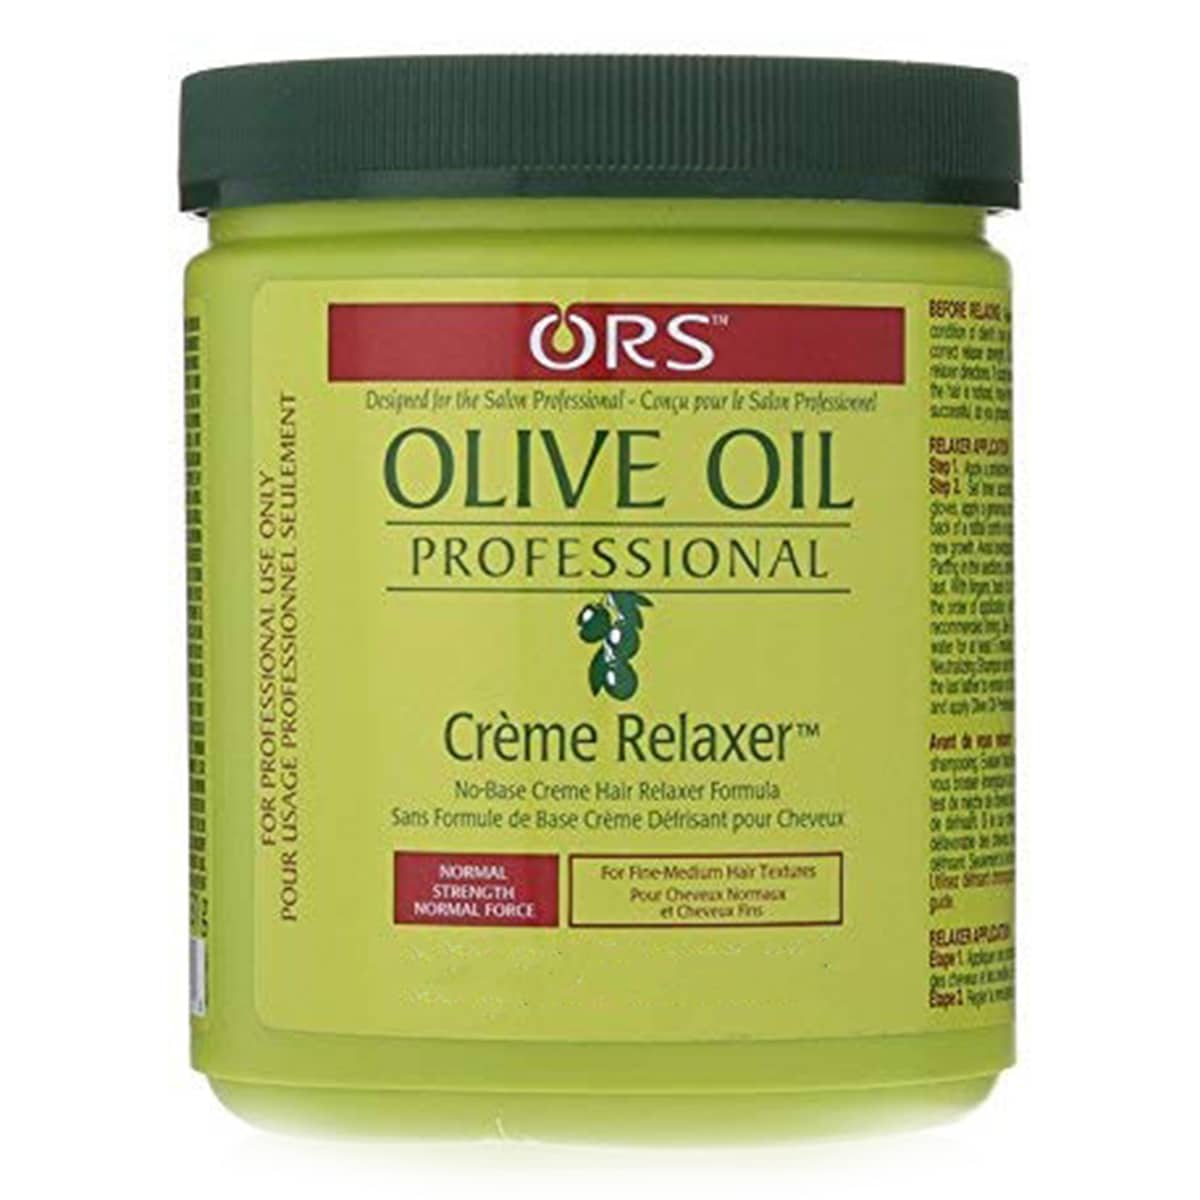 Buy Organic Root Stimulator (ORS) Olive Oil Professional Crème Relaxer Normal - 530 gm